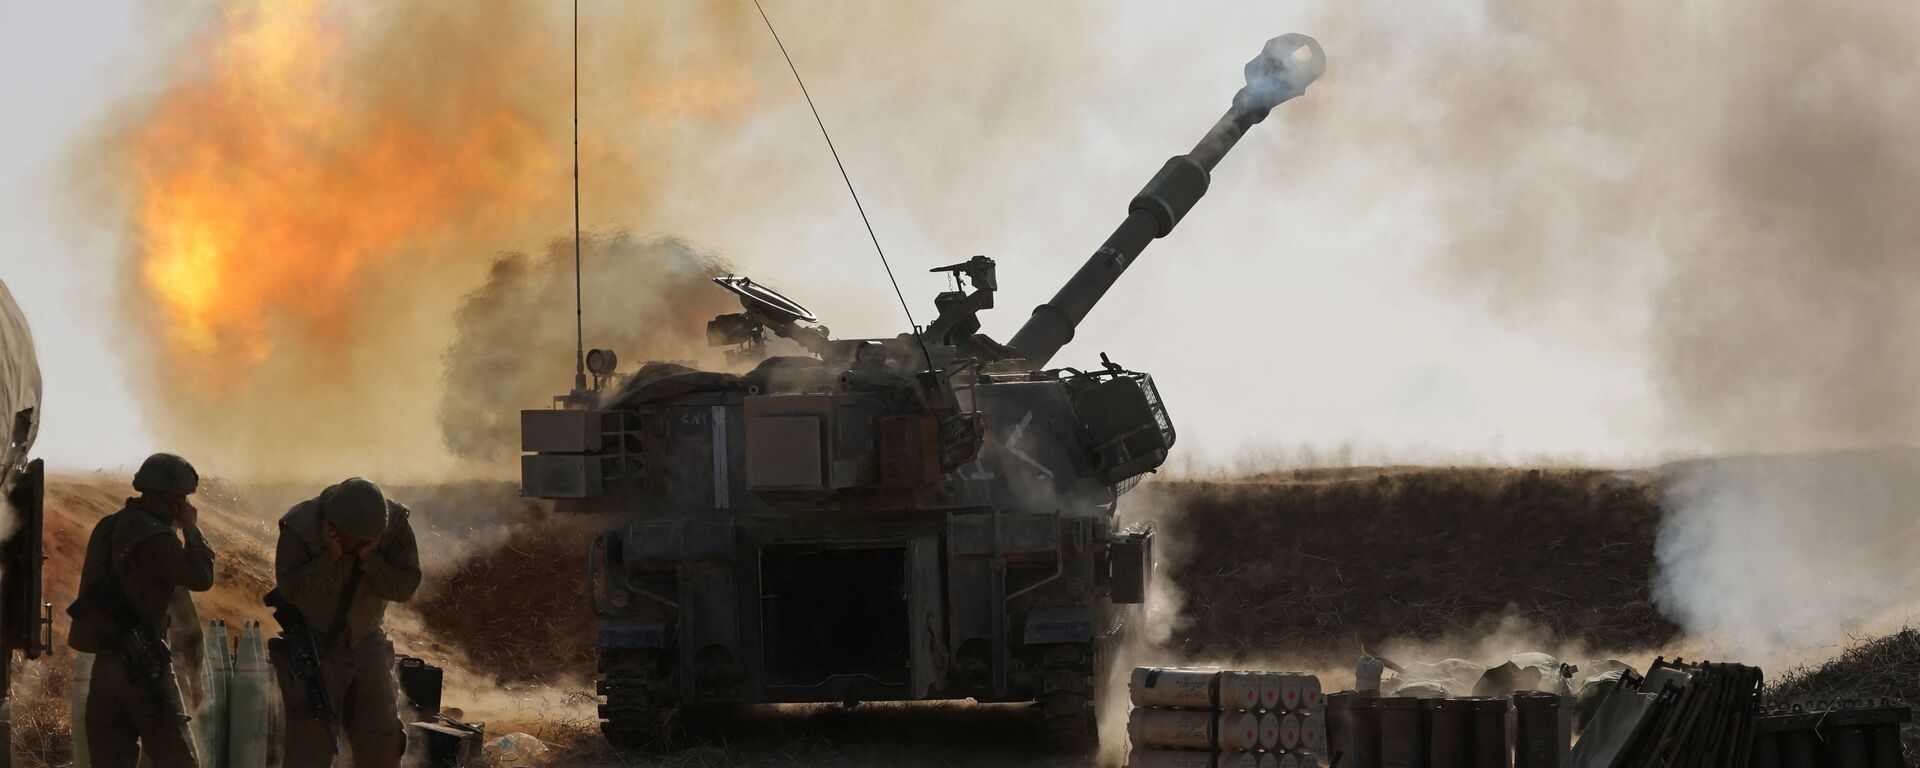 Israeli soldiers fire a 155mm self-propelled howitzer towards targets in the Gaza Strip from their position near the southern Israeli city of Sderot on May 12, 2021. - Israel's Defence Minister Benny Gantz vowed more attacks on Hamas and other Palestinian militant groups in Gaza to bring total, long-term quiet before considering a ceasefire. - Sputnik International, 1920, 06.01.2024